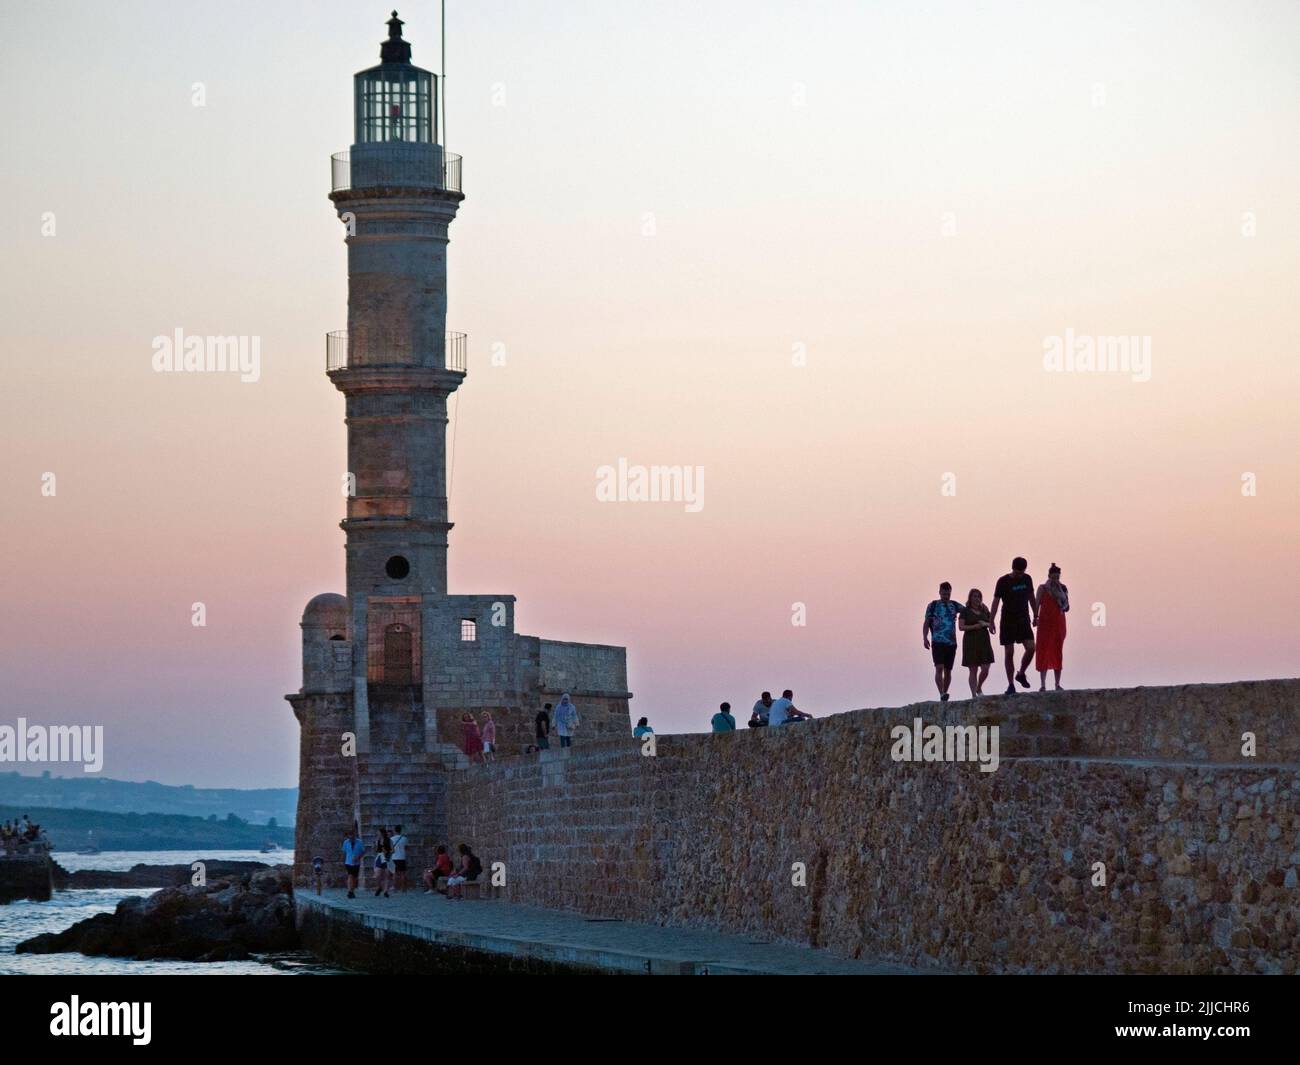 The lighthouse in the old Venetian harbour of Chania, Crete Stock Photo